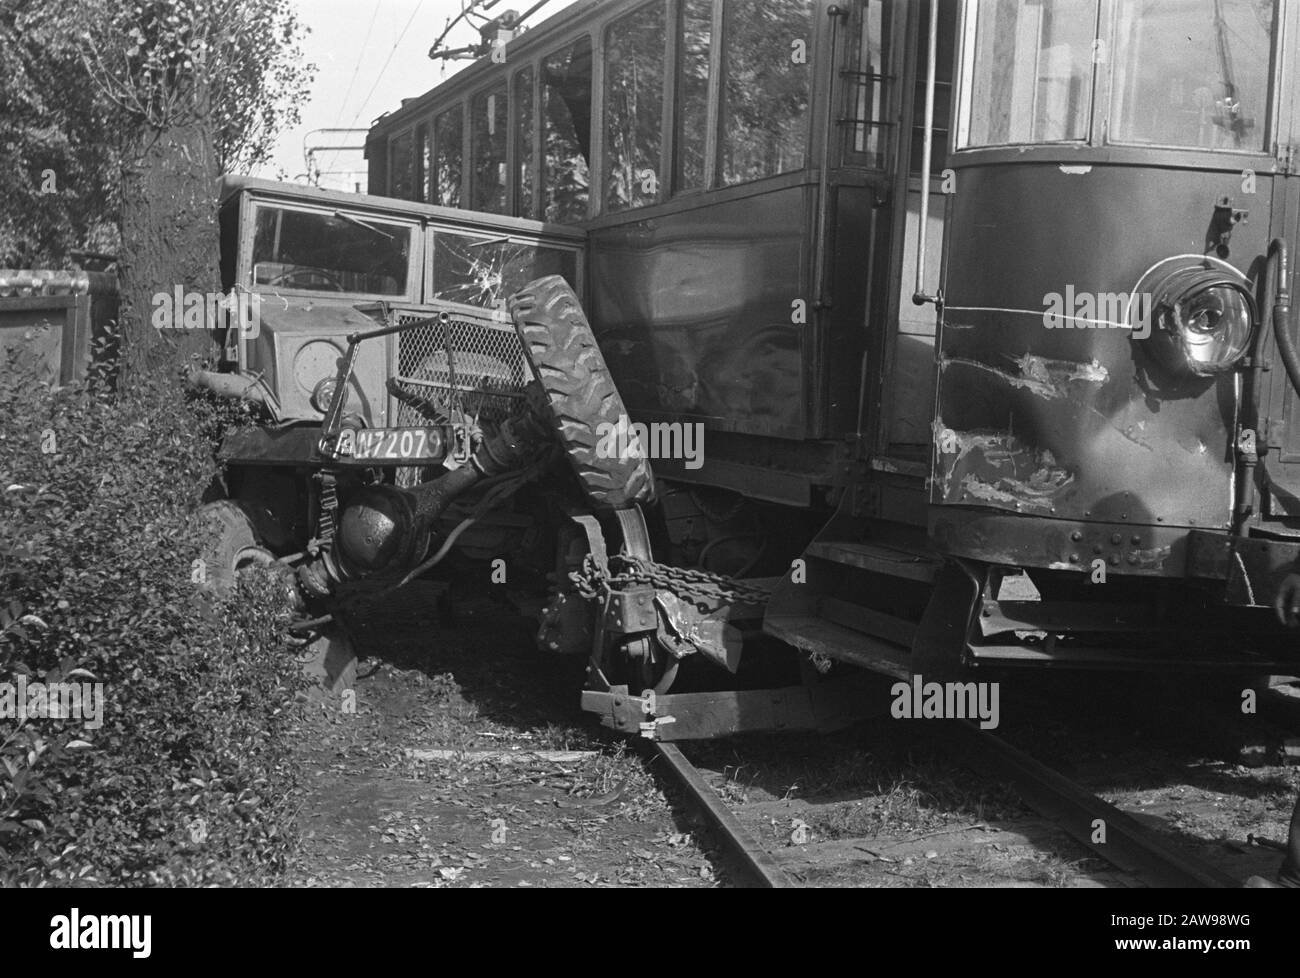 NZH tram derailment after collision with truck. Meeuwenlaan at old Droogdokmij Date: September 26, 1946 Location: Amsterdam, Noord-Holland Keywords: collisions, accidents, trams Institution Name: NZH Stock Photo